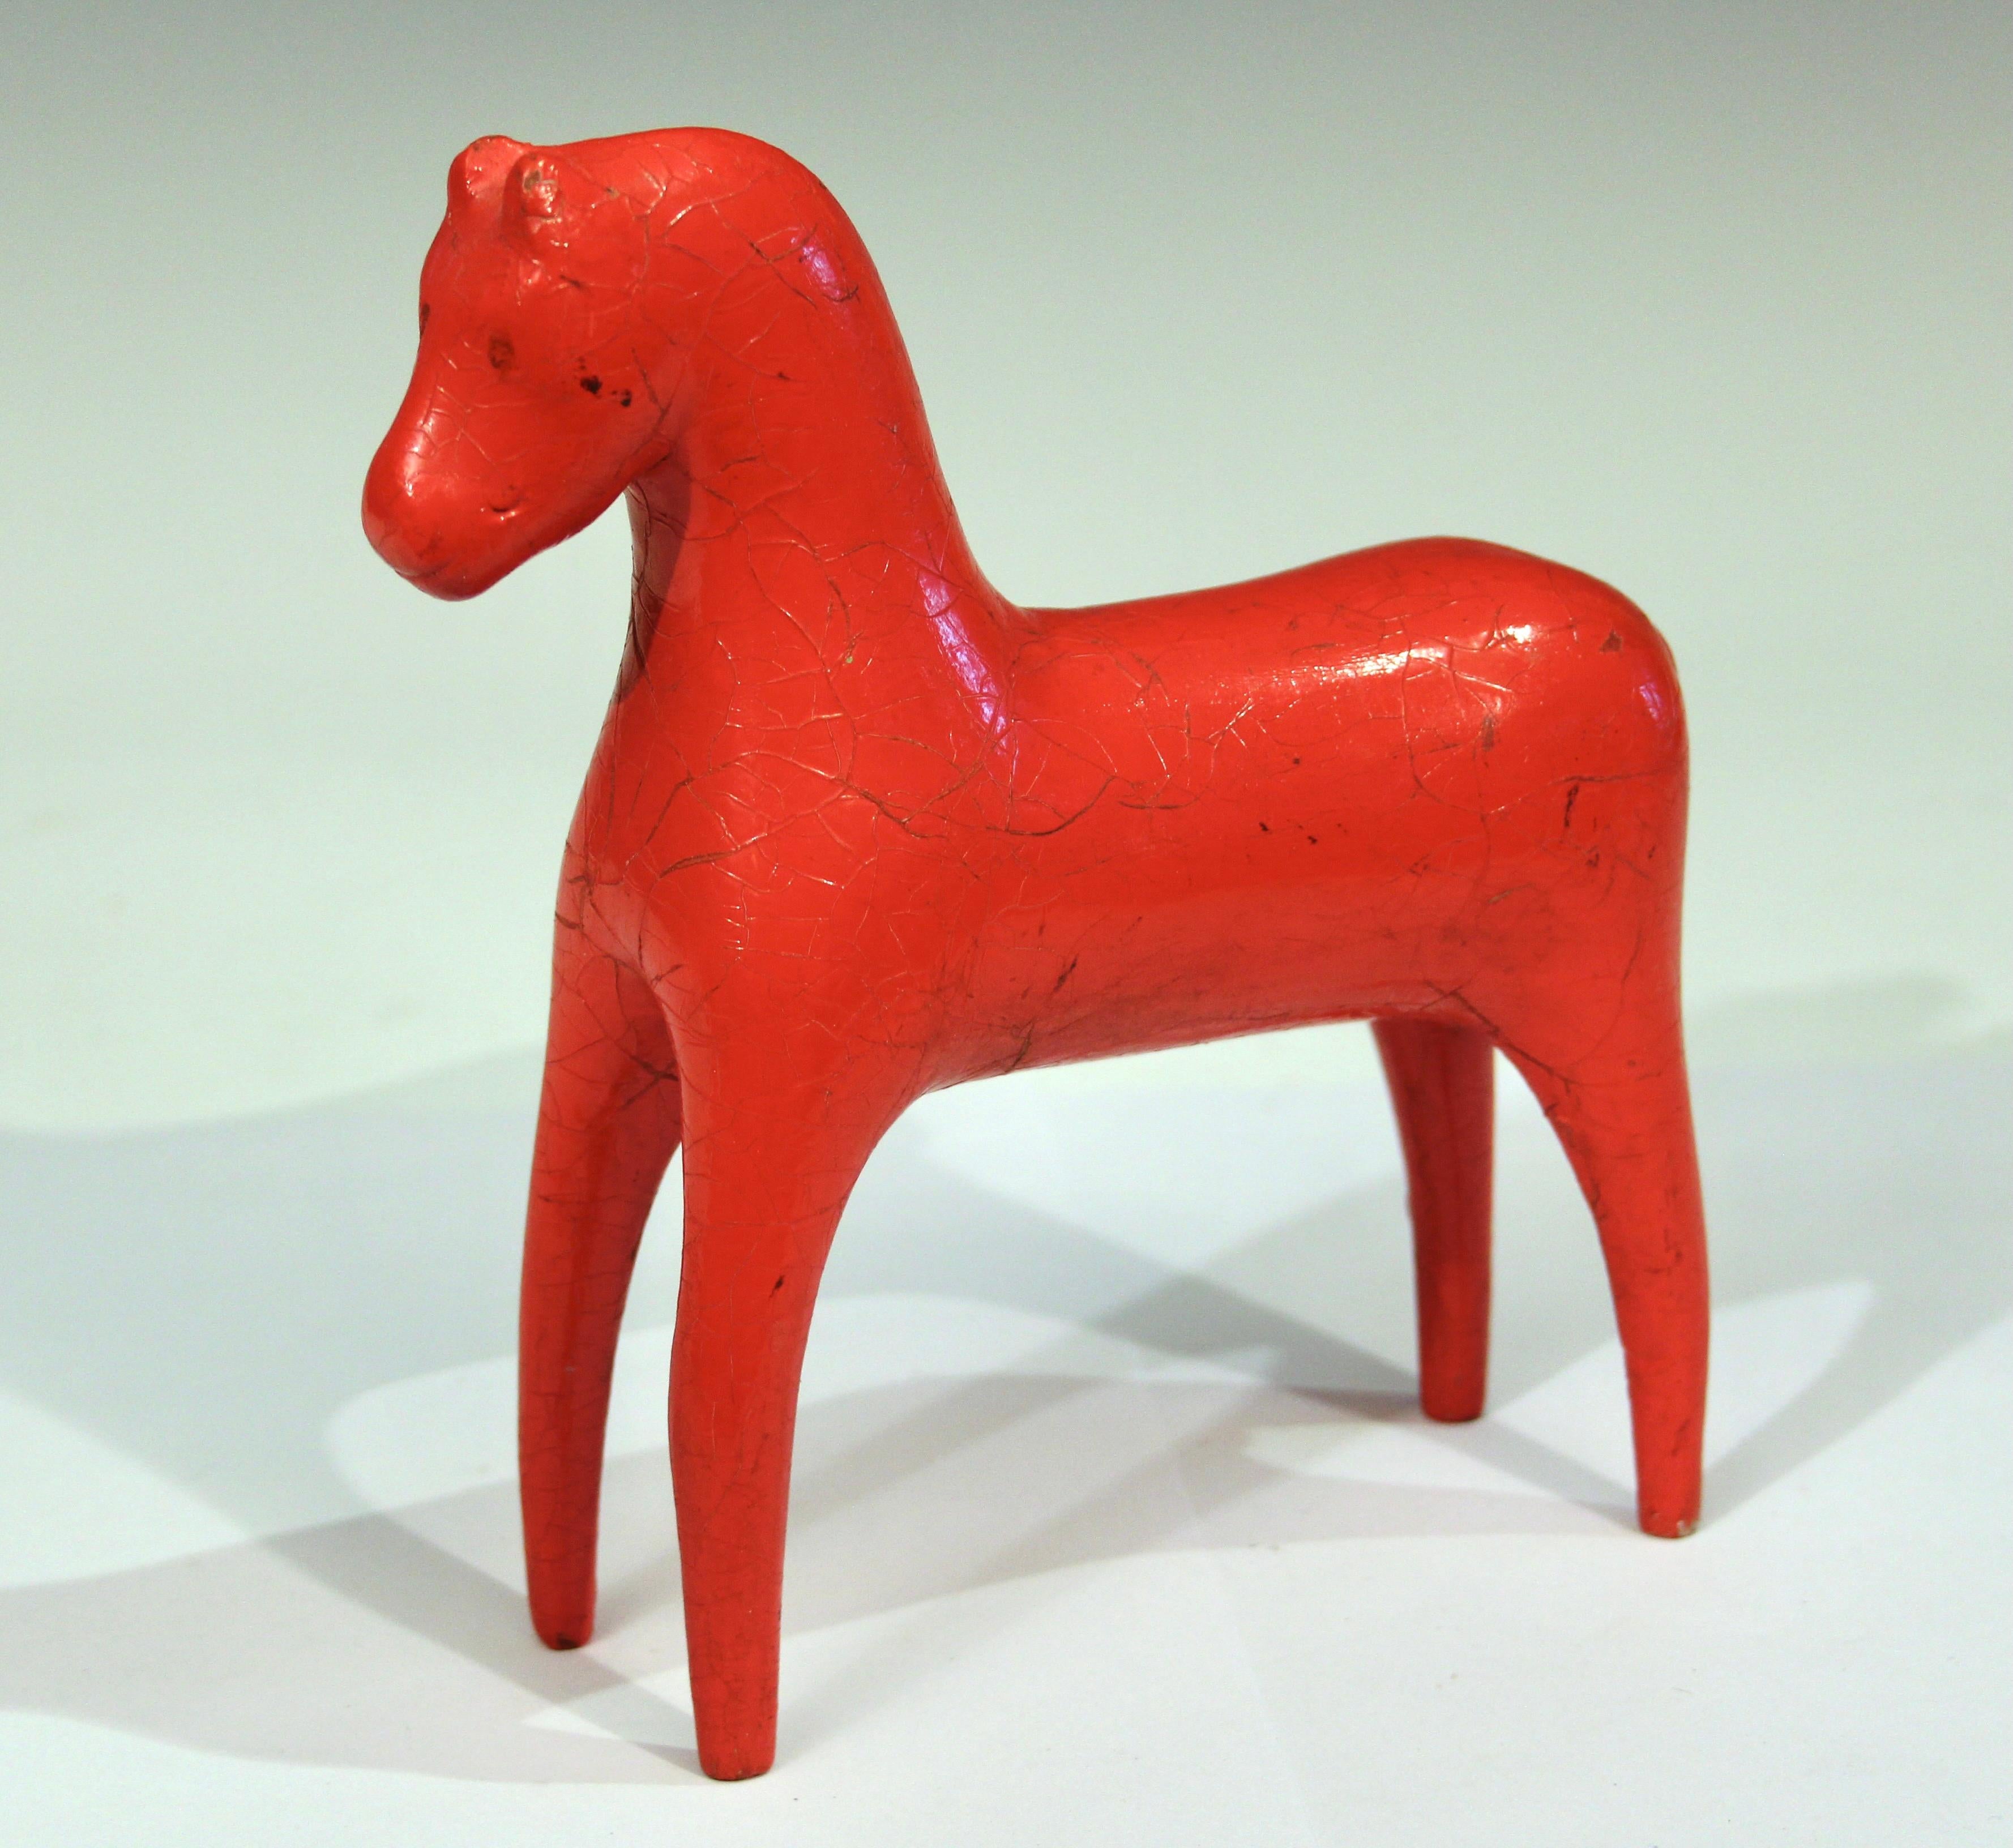 Antique Swedish Dala horse in bright red paint, circa 19th/early 20th century. Beautifully carved with slender legs and graceful form with little ears, a cropped tail, and faintly defined grin. With heavy red oil paint that has crackled over the